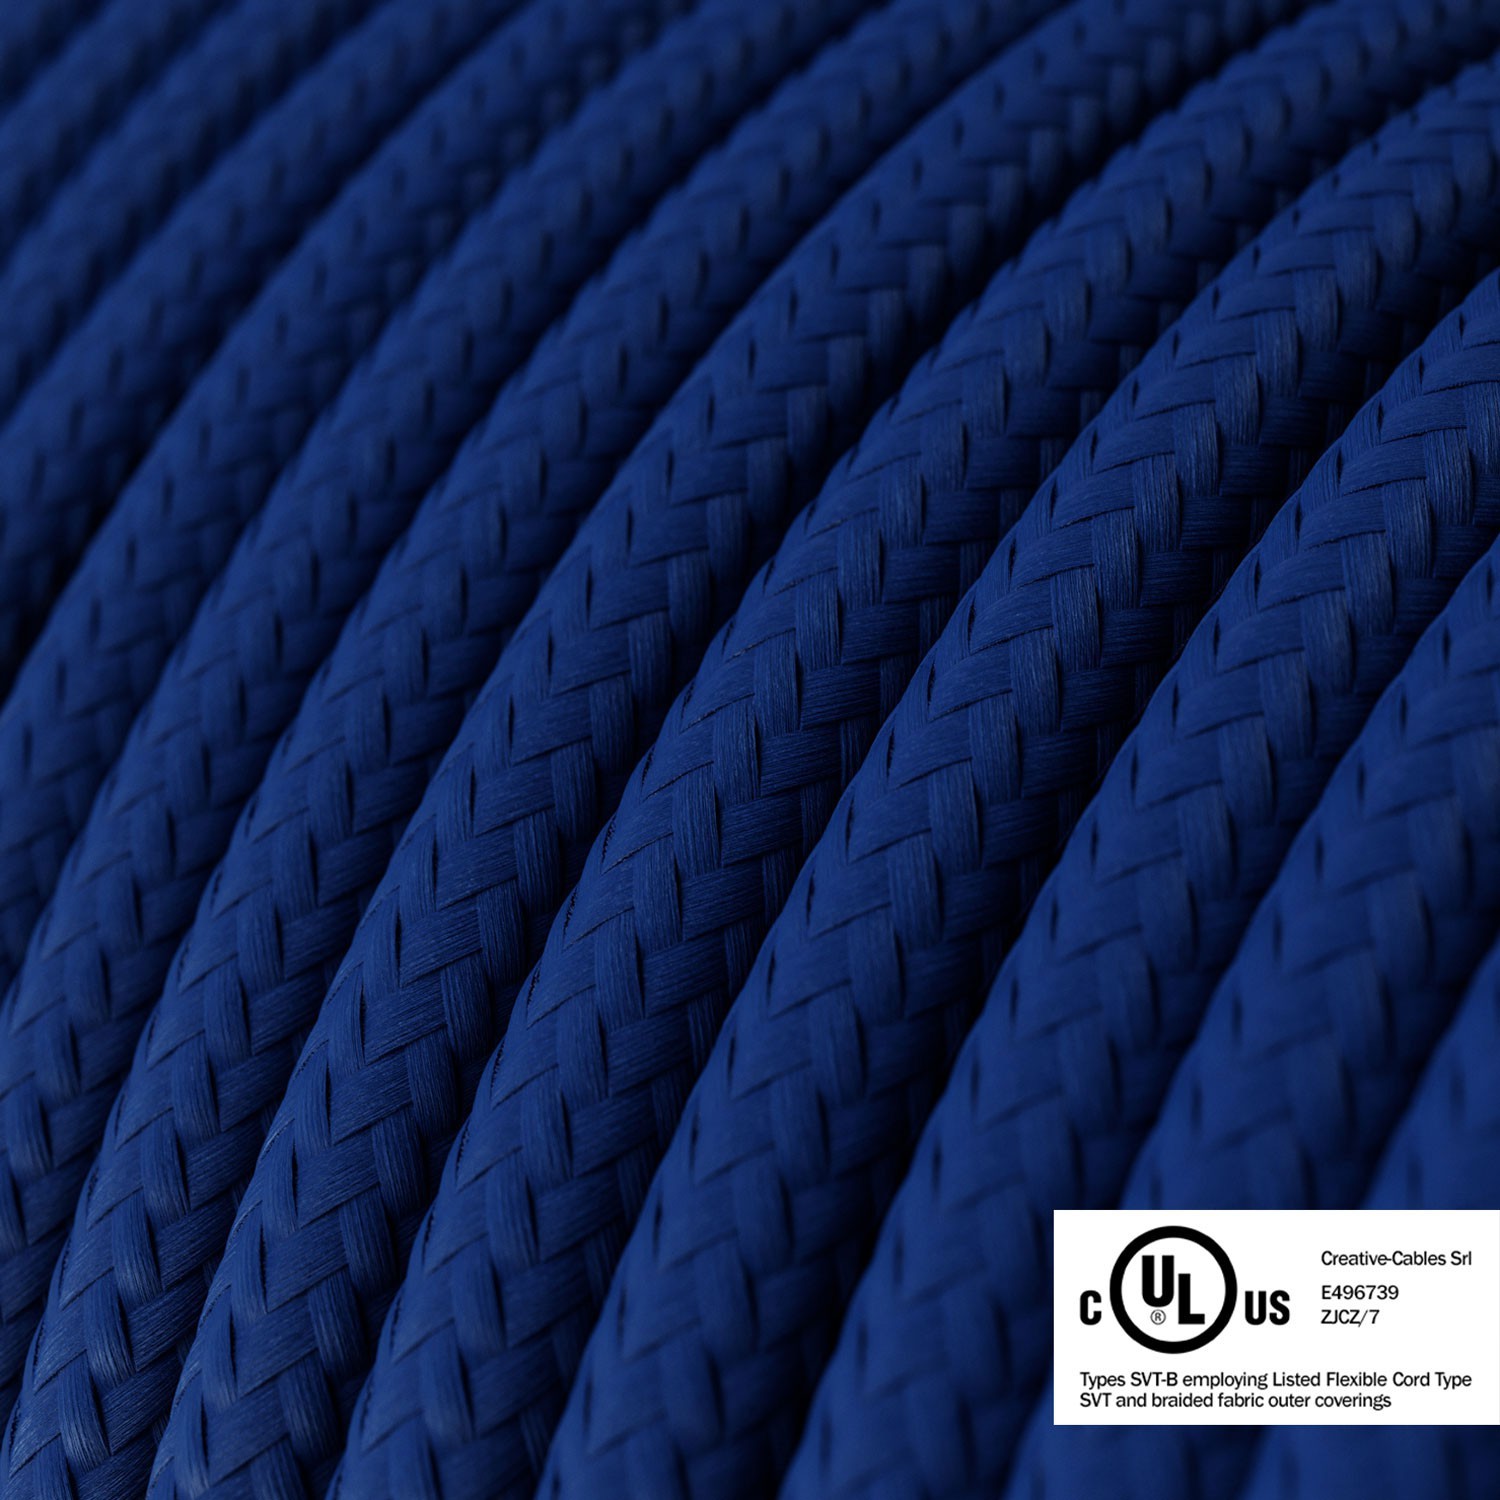 Round Electric Cable 150 ft (45,72 m) coil RM12 Blue Rayon - UL listed